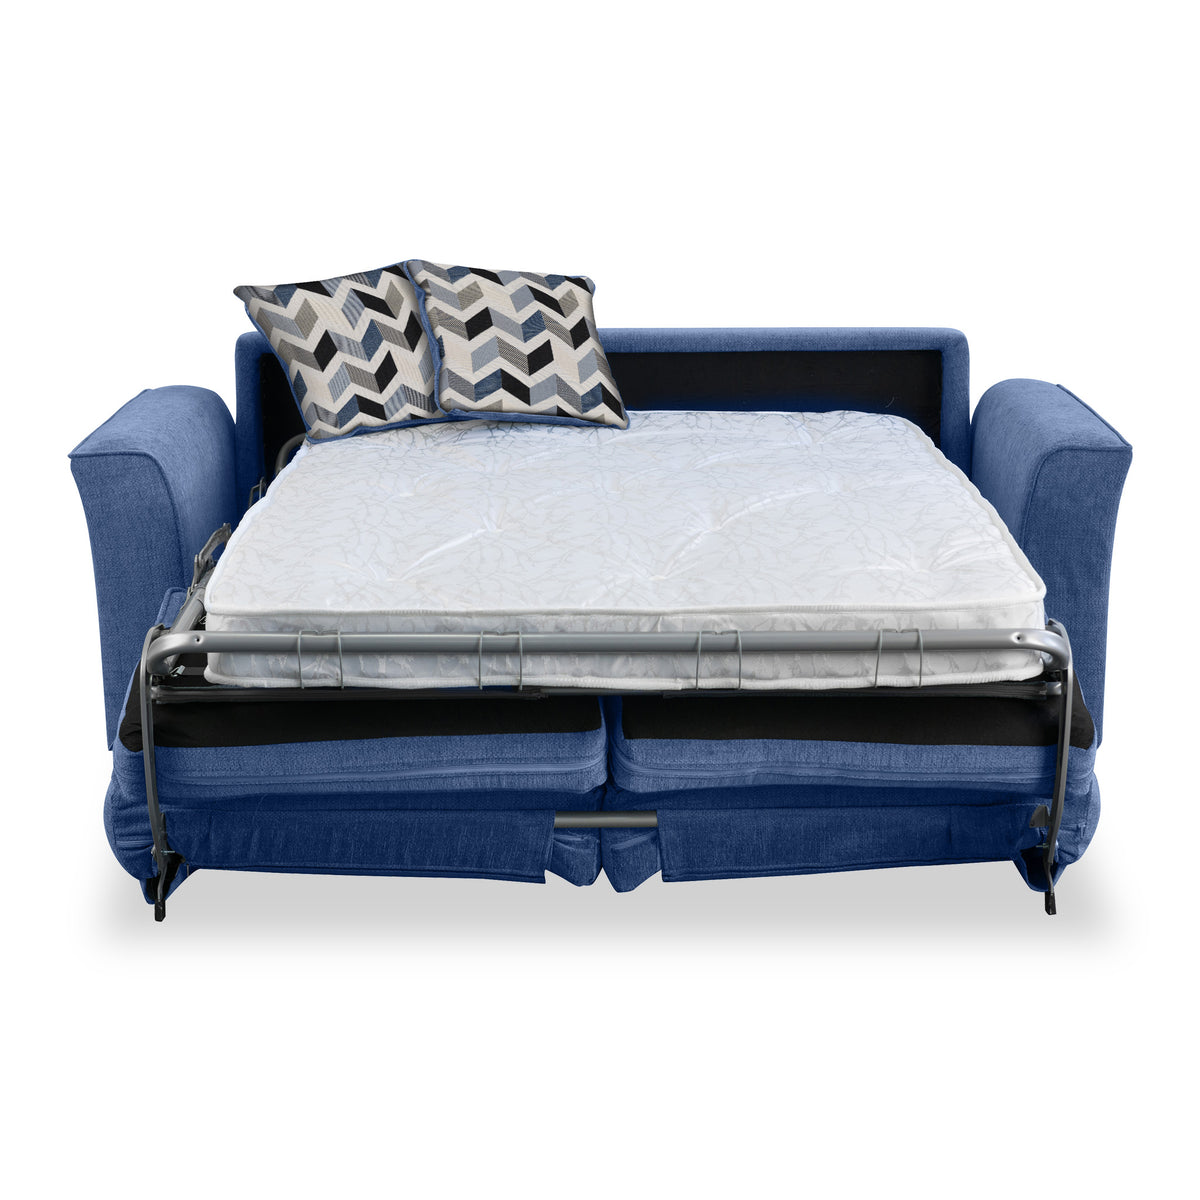 Abbott 2 Seater Sofabed in Denim with Morelisa Denim Cushions by Roseland Furniture